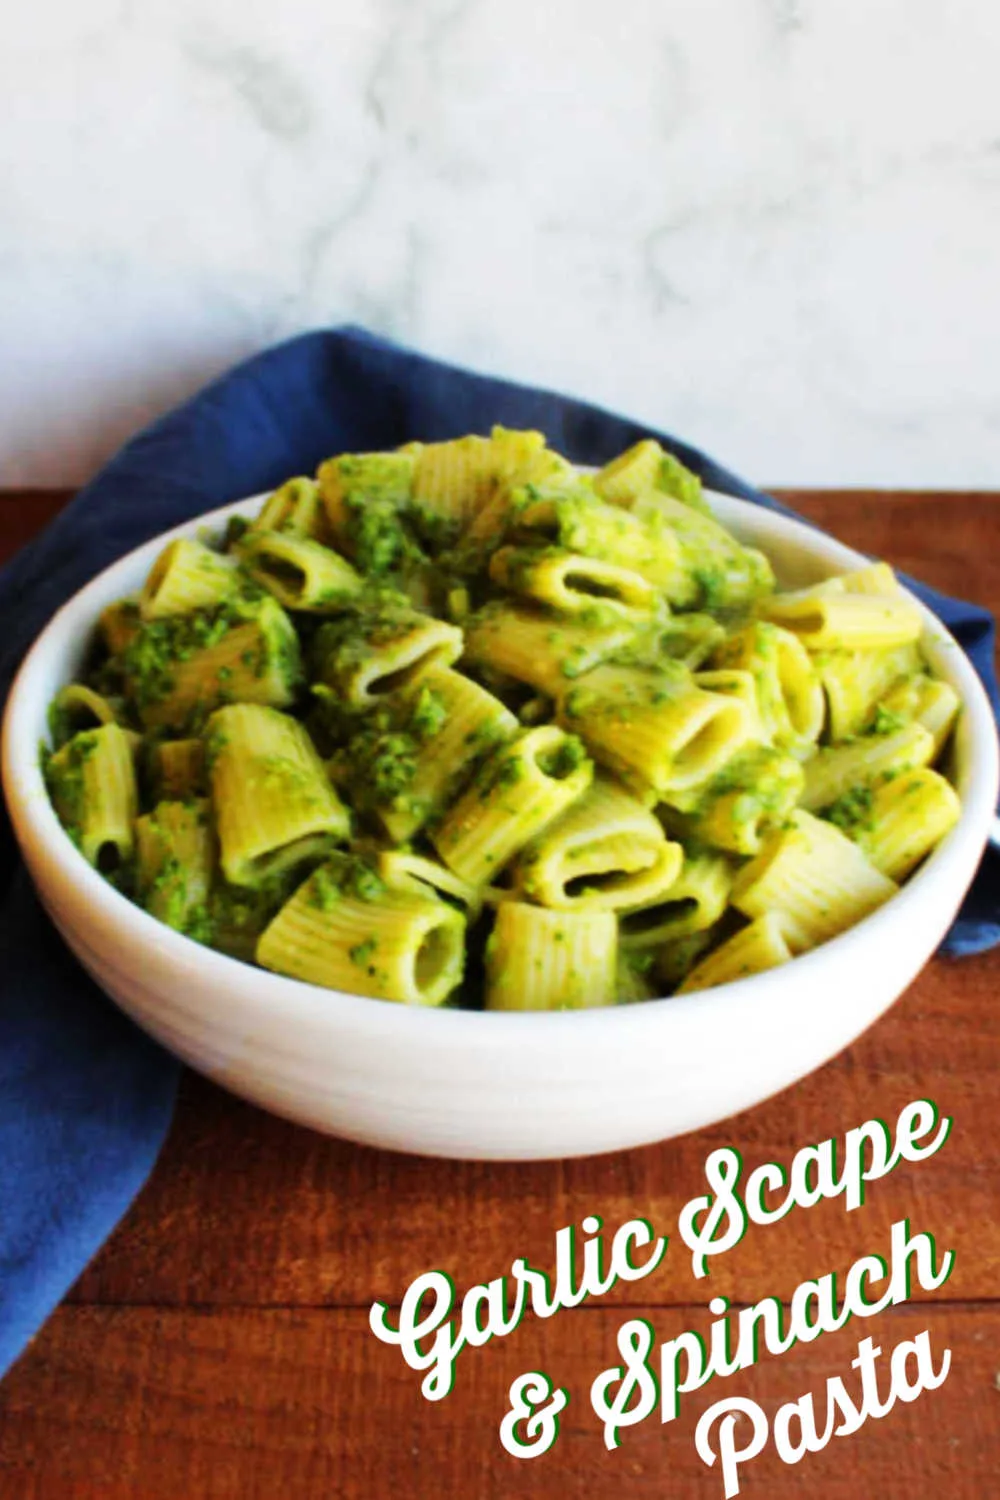 Using fresh veggies and a little pasta is a great way to get a nutritious meal on the table quickly. This simple recipe makes a fabulous pesto style sauce out of fresh spinach and garlic scapes. The result is bright, garlicky and ready in almost no time at all. Serve it as is for a great meatless meal or add chicken or shrimp to make it even more hearty.